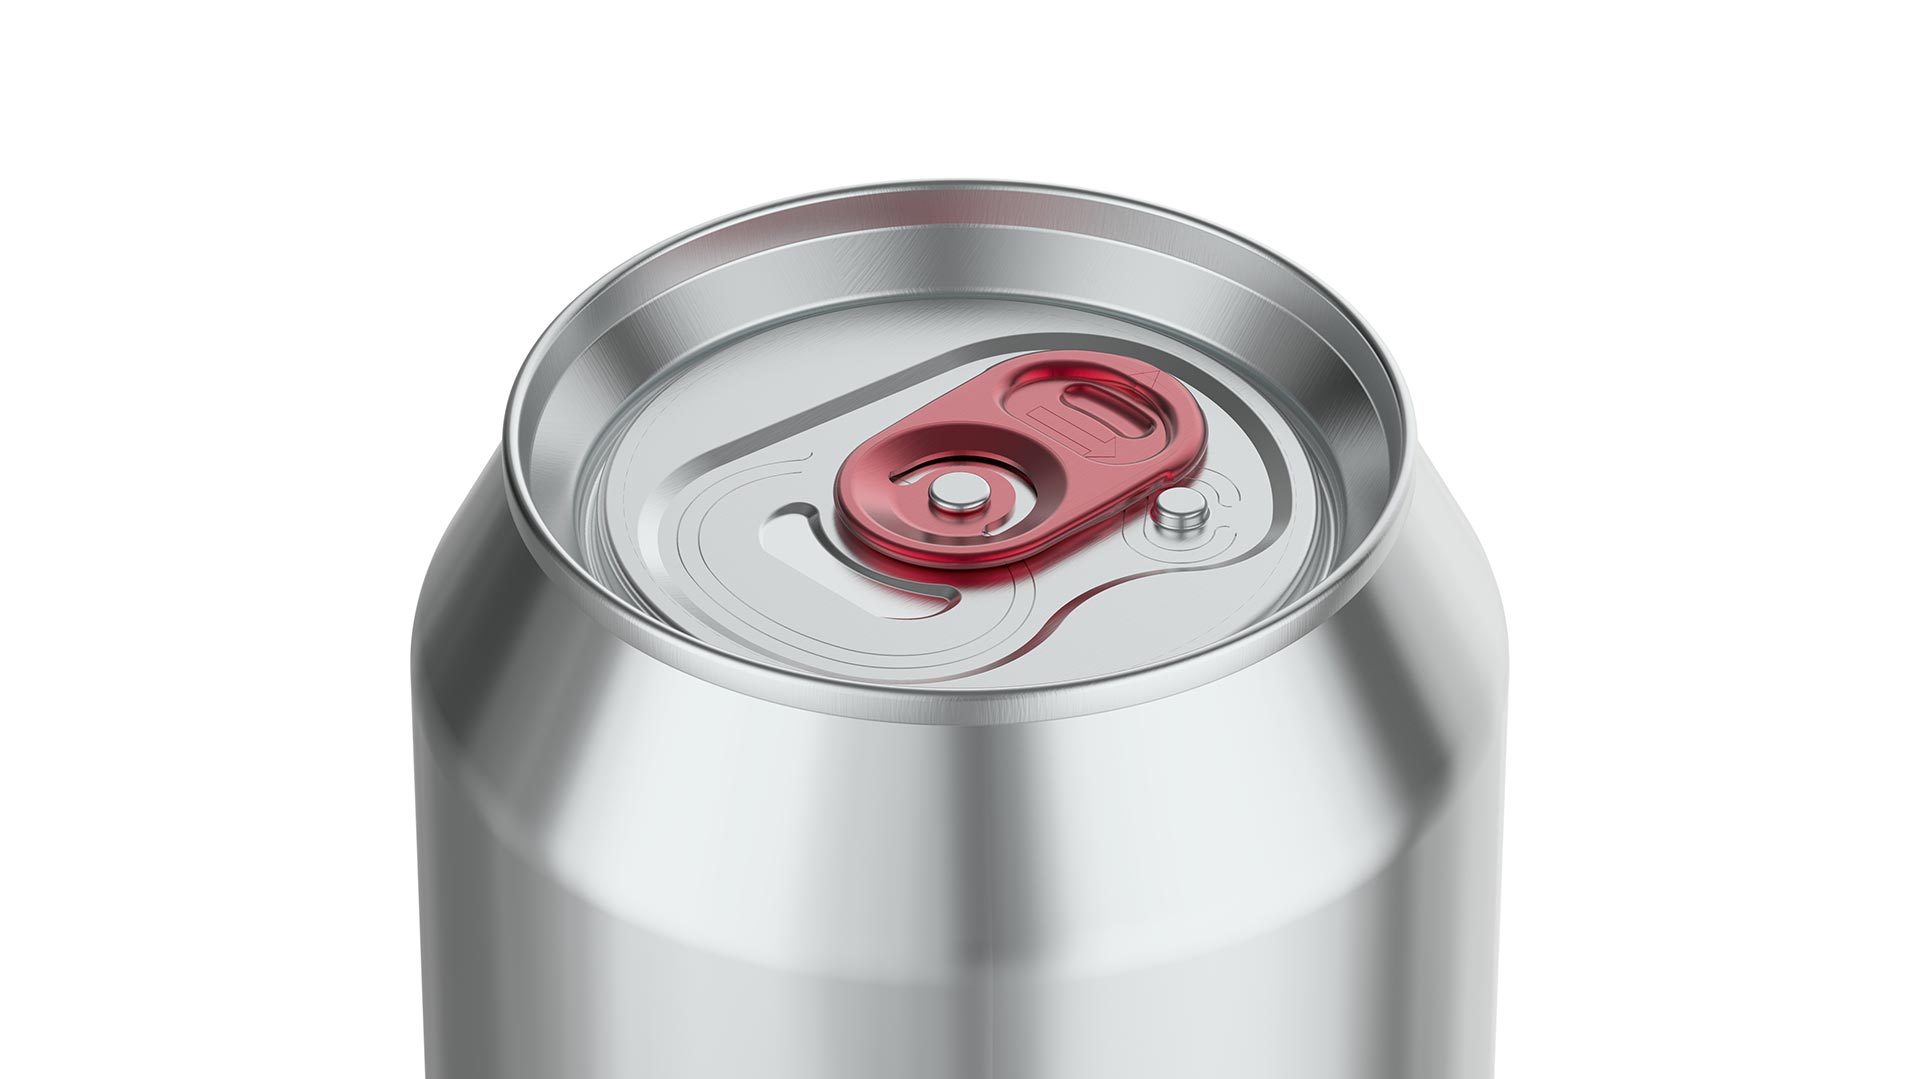 A silver aluminum can with a red pull tab